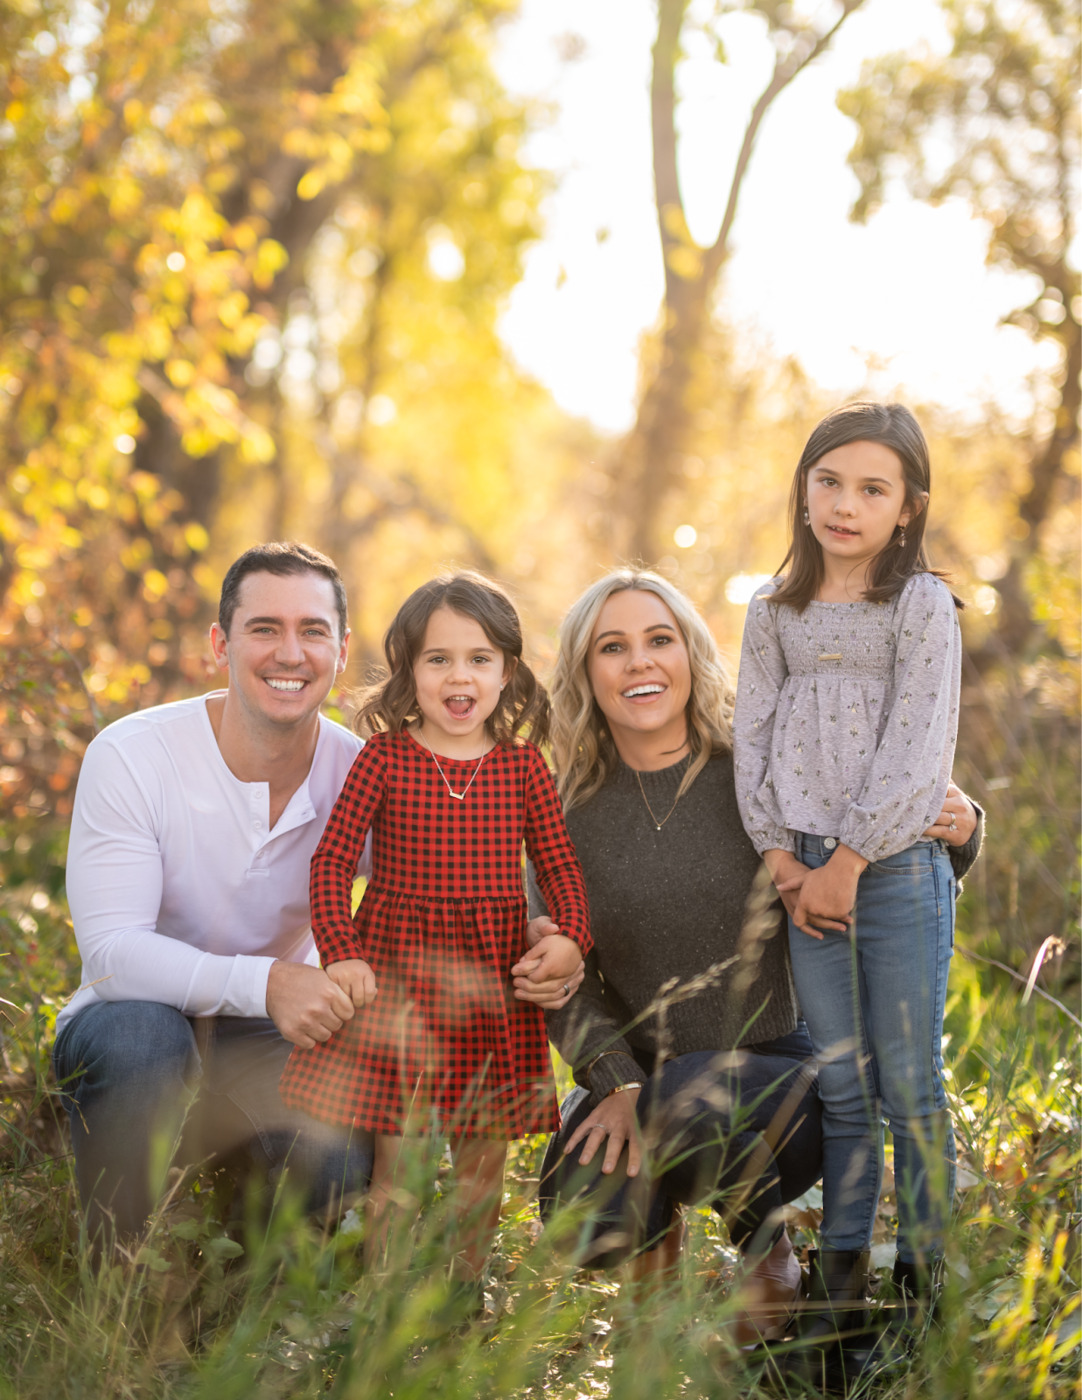 Known for her clean, creative, and contemporary style of photography, Juliana Wilfong, who has been published in several prestigious publications, has become the trusted name among families in Colorado who want to cherish their stories through images that put a smile on their faces.